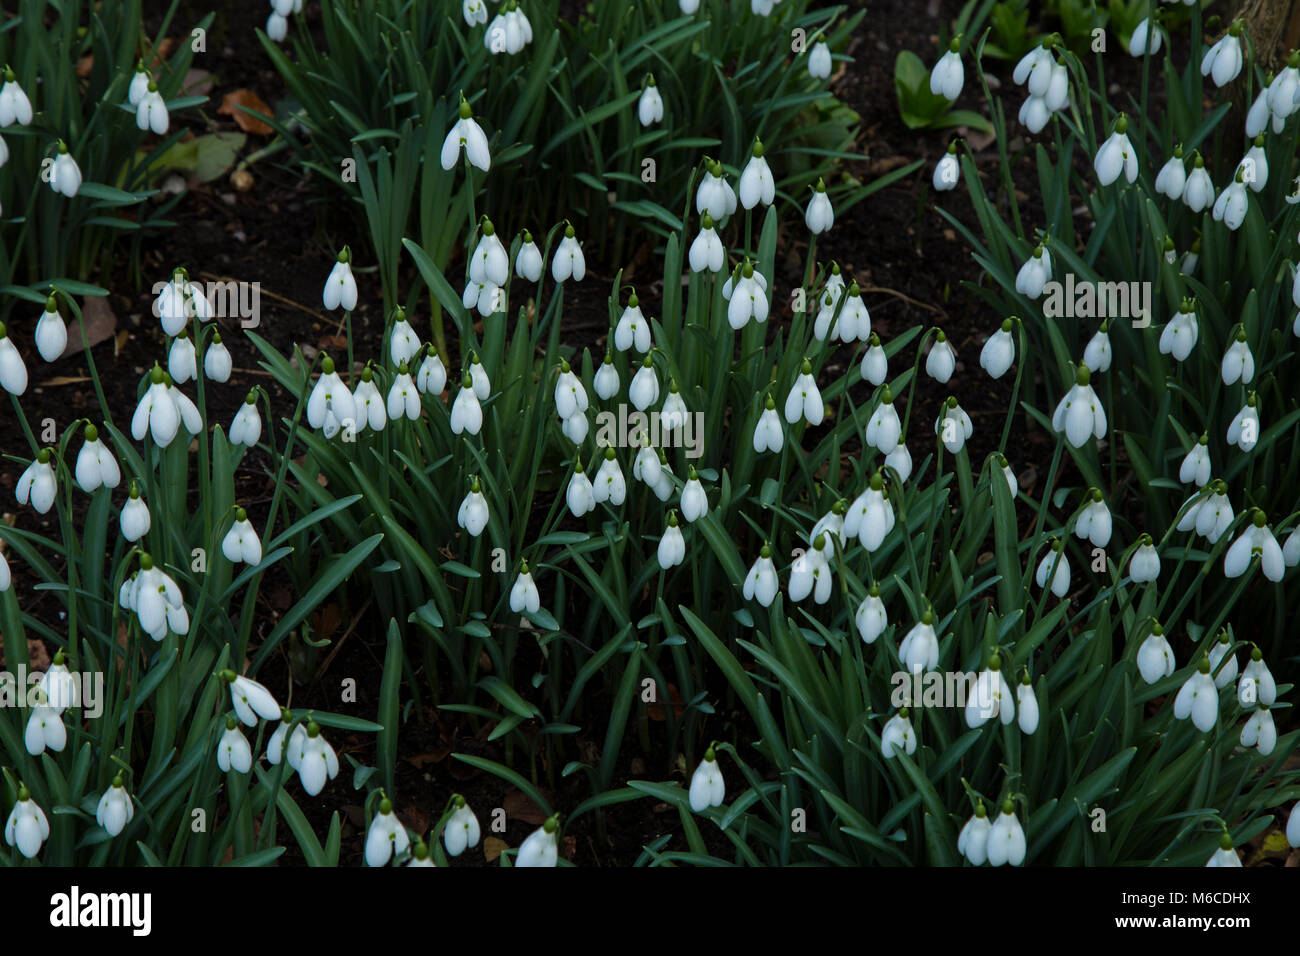 Snowdrops in Yorkshire, England. Stock Photo